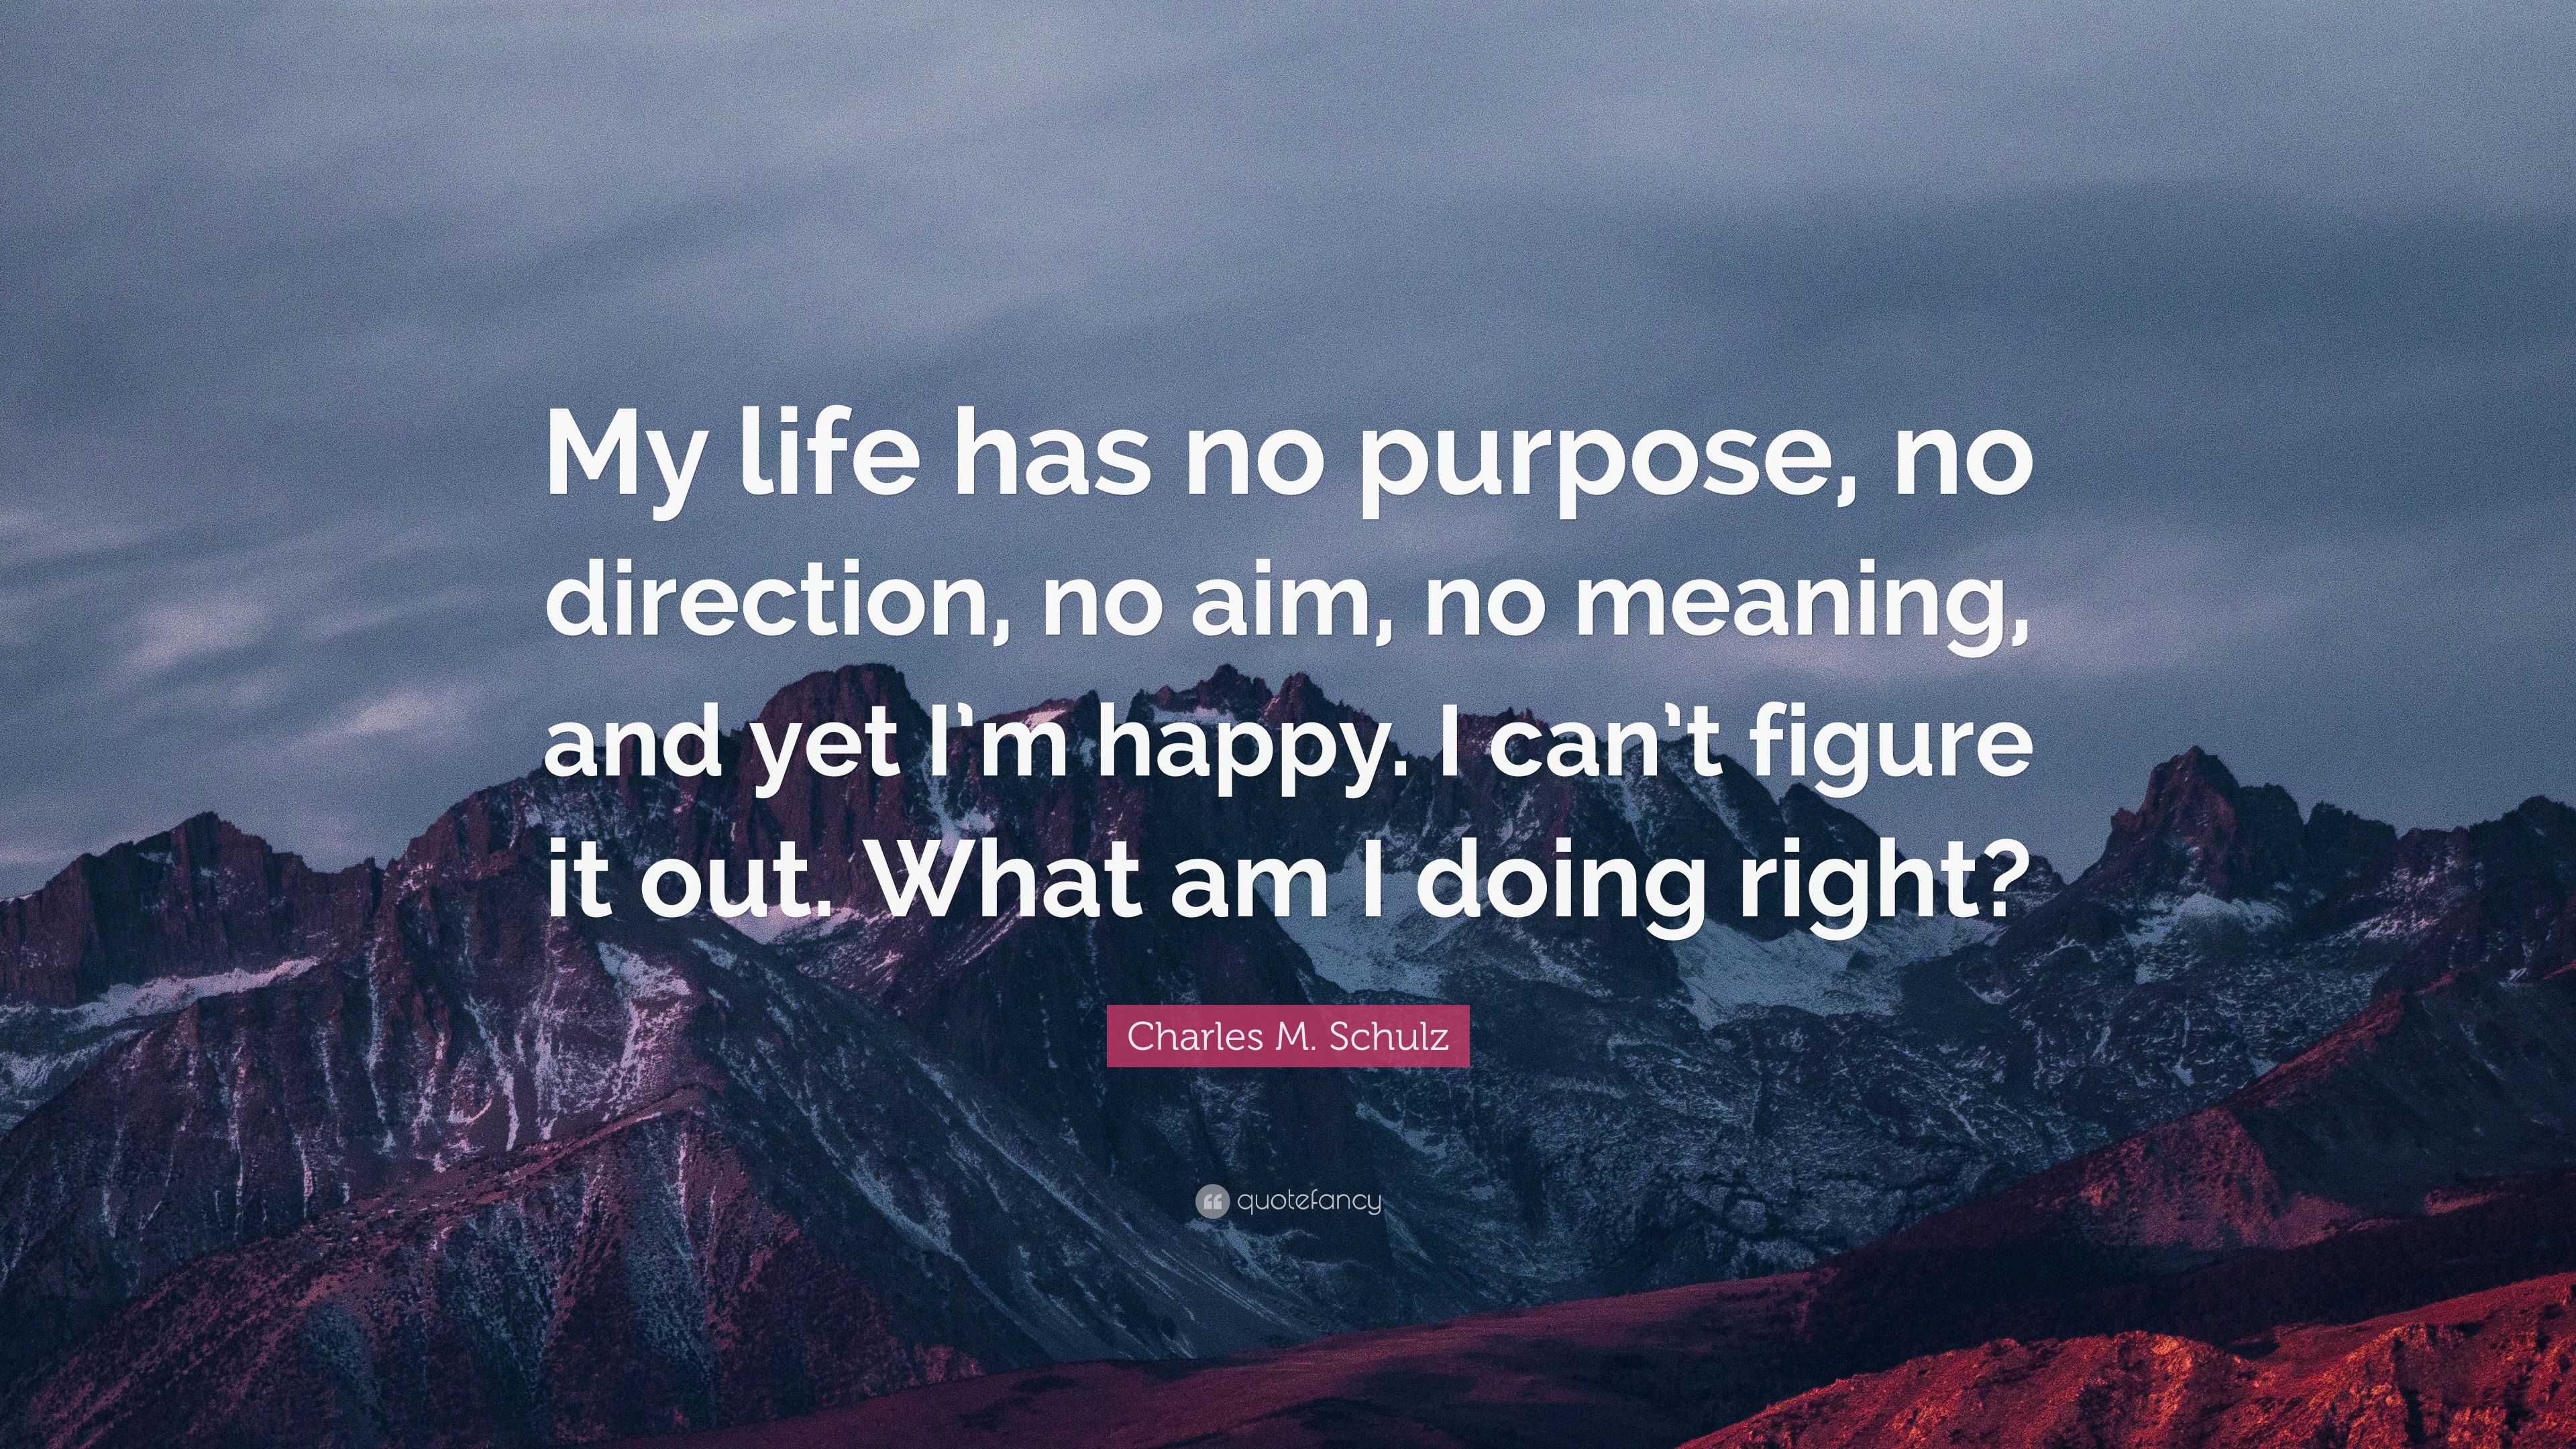 Charles M. Schulz Quote: “My life has no purpose, no direction, no aim ...